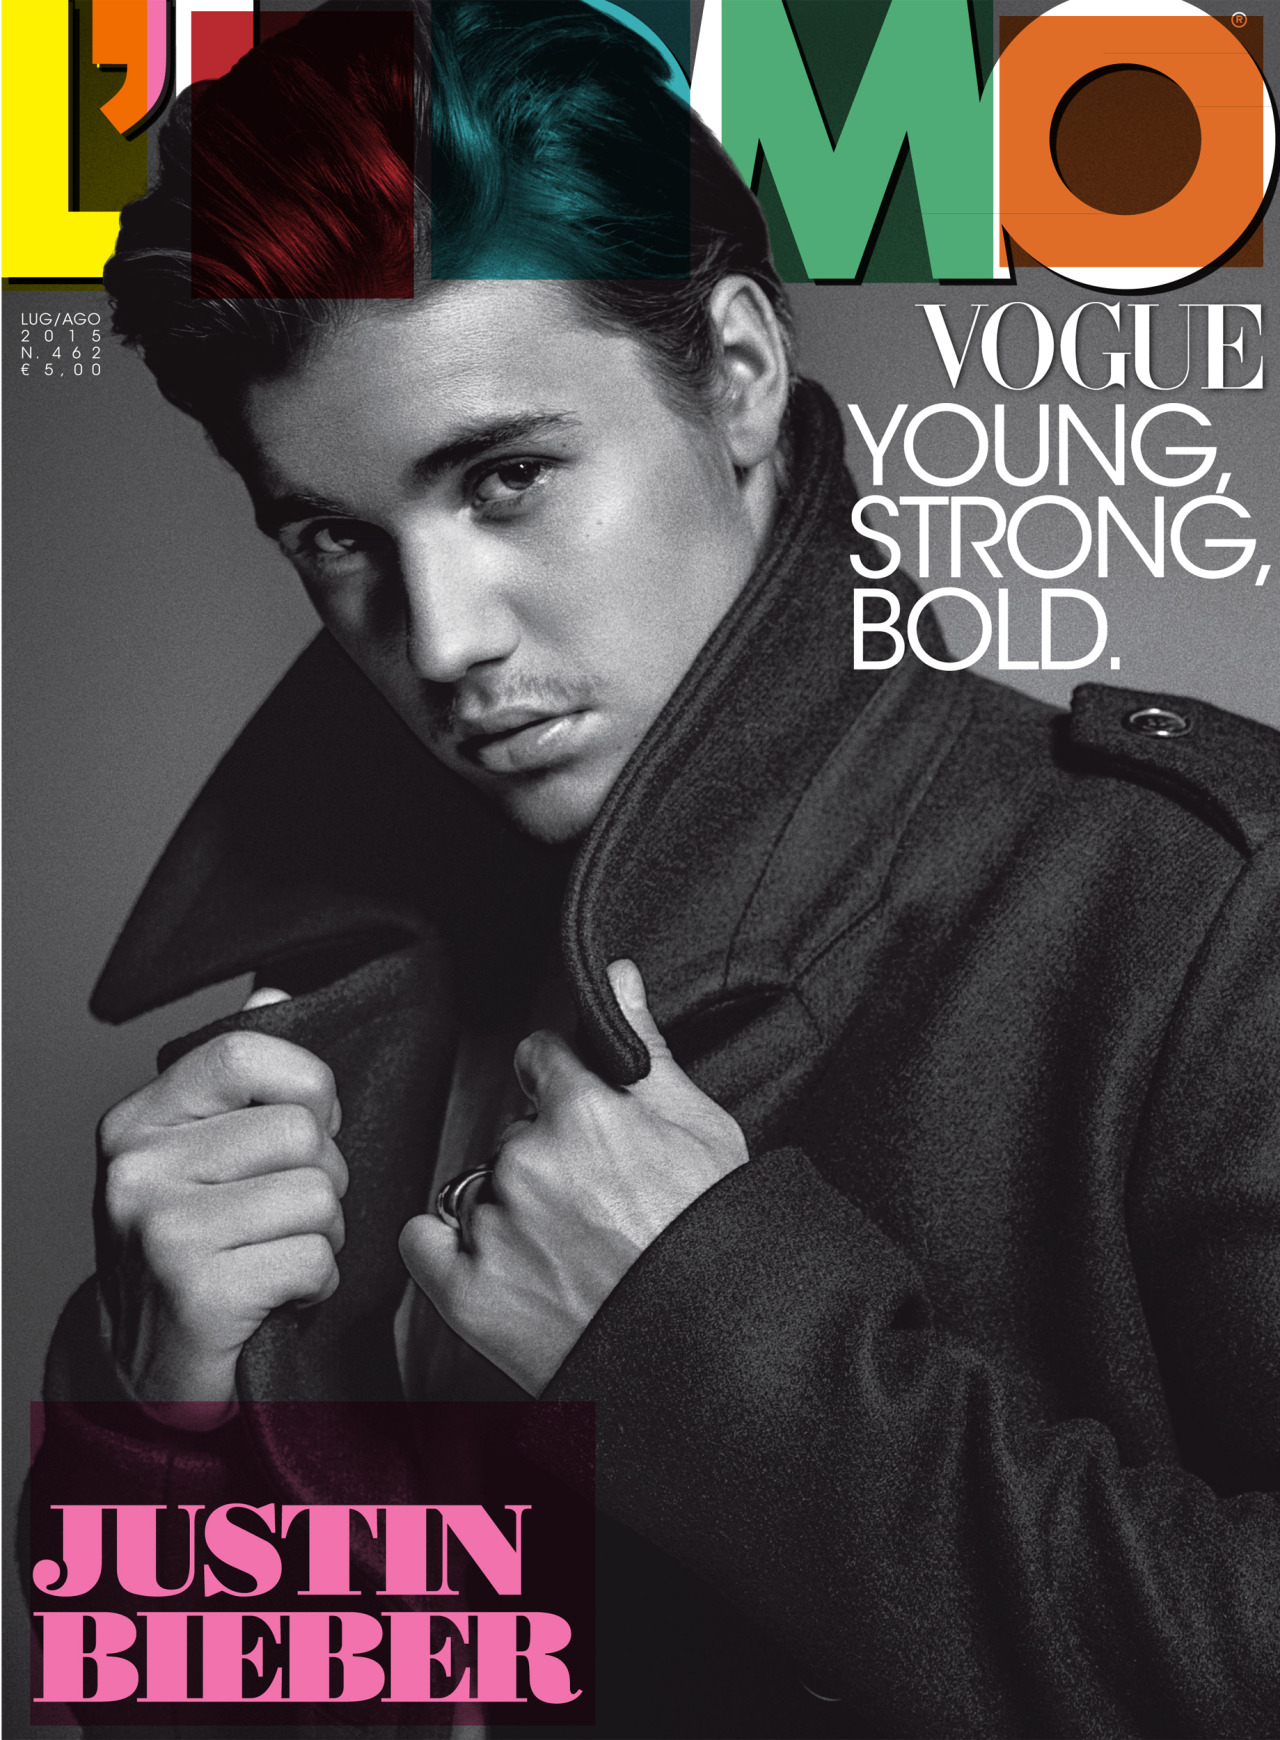 Justin Bieber Has Coat Moment For Luomo Vogue Julyaugust 2015 Cover 